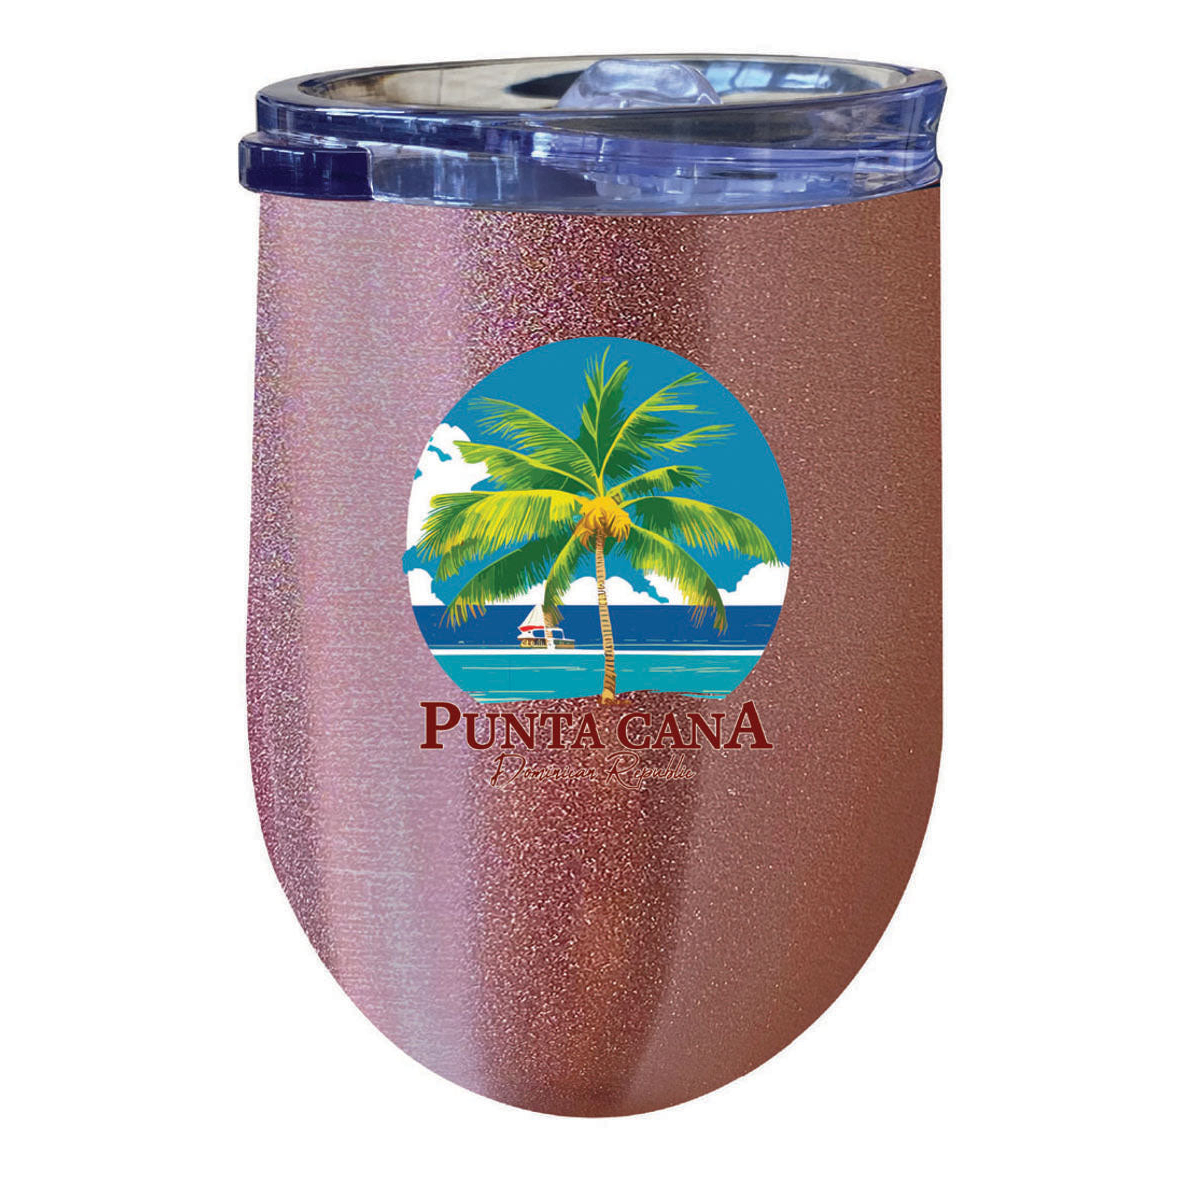 Punta Cana Dominican Republic Souvenir 12 Oz Insulated Wine Stainless Steel Tumbler - White, PARROT